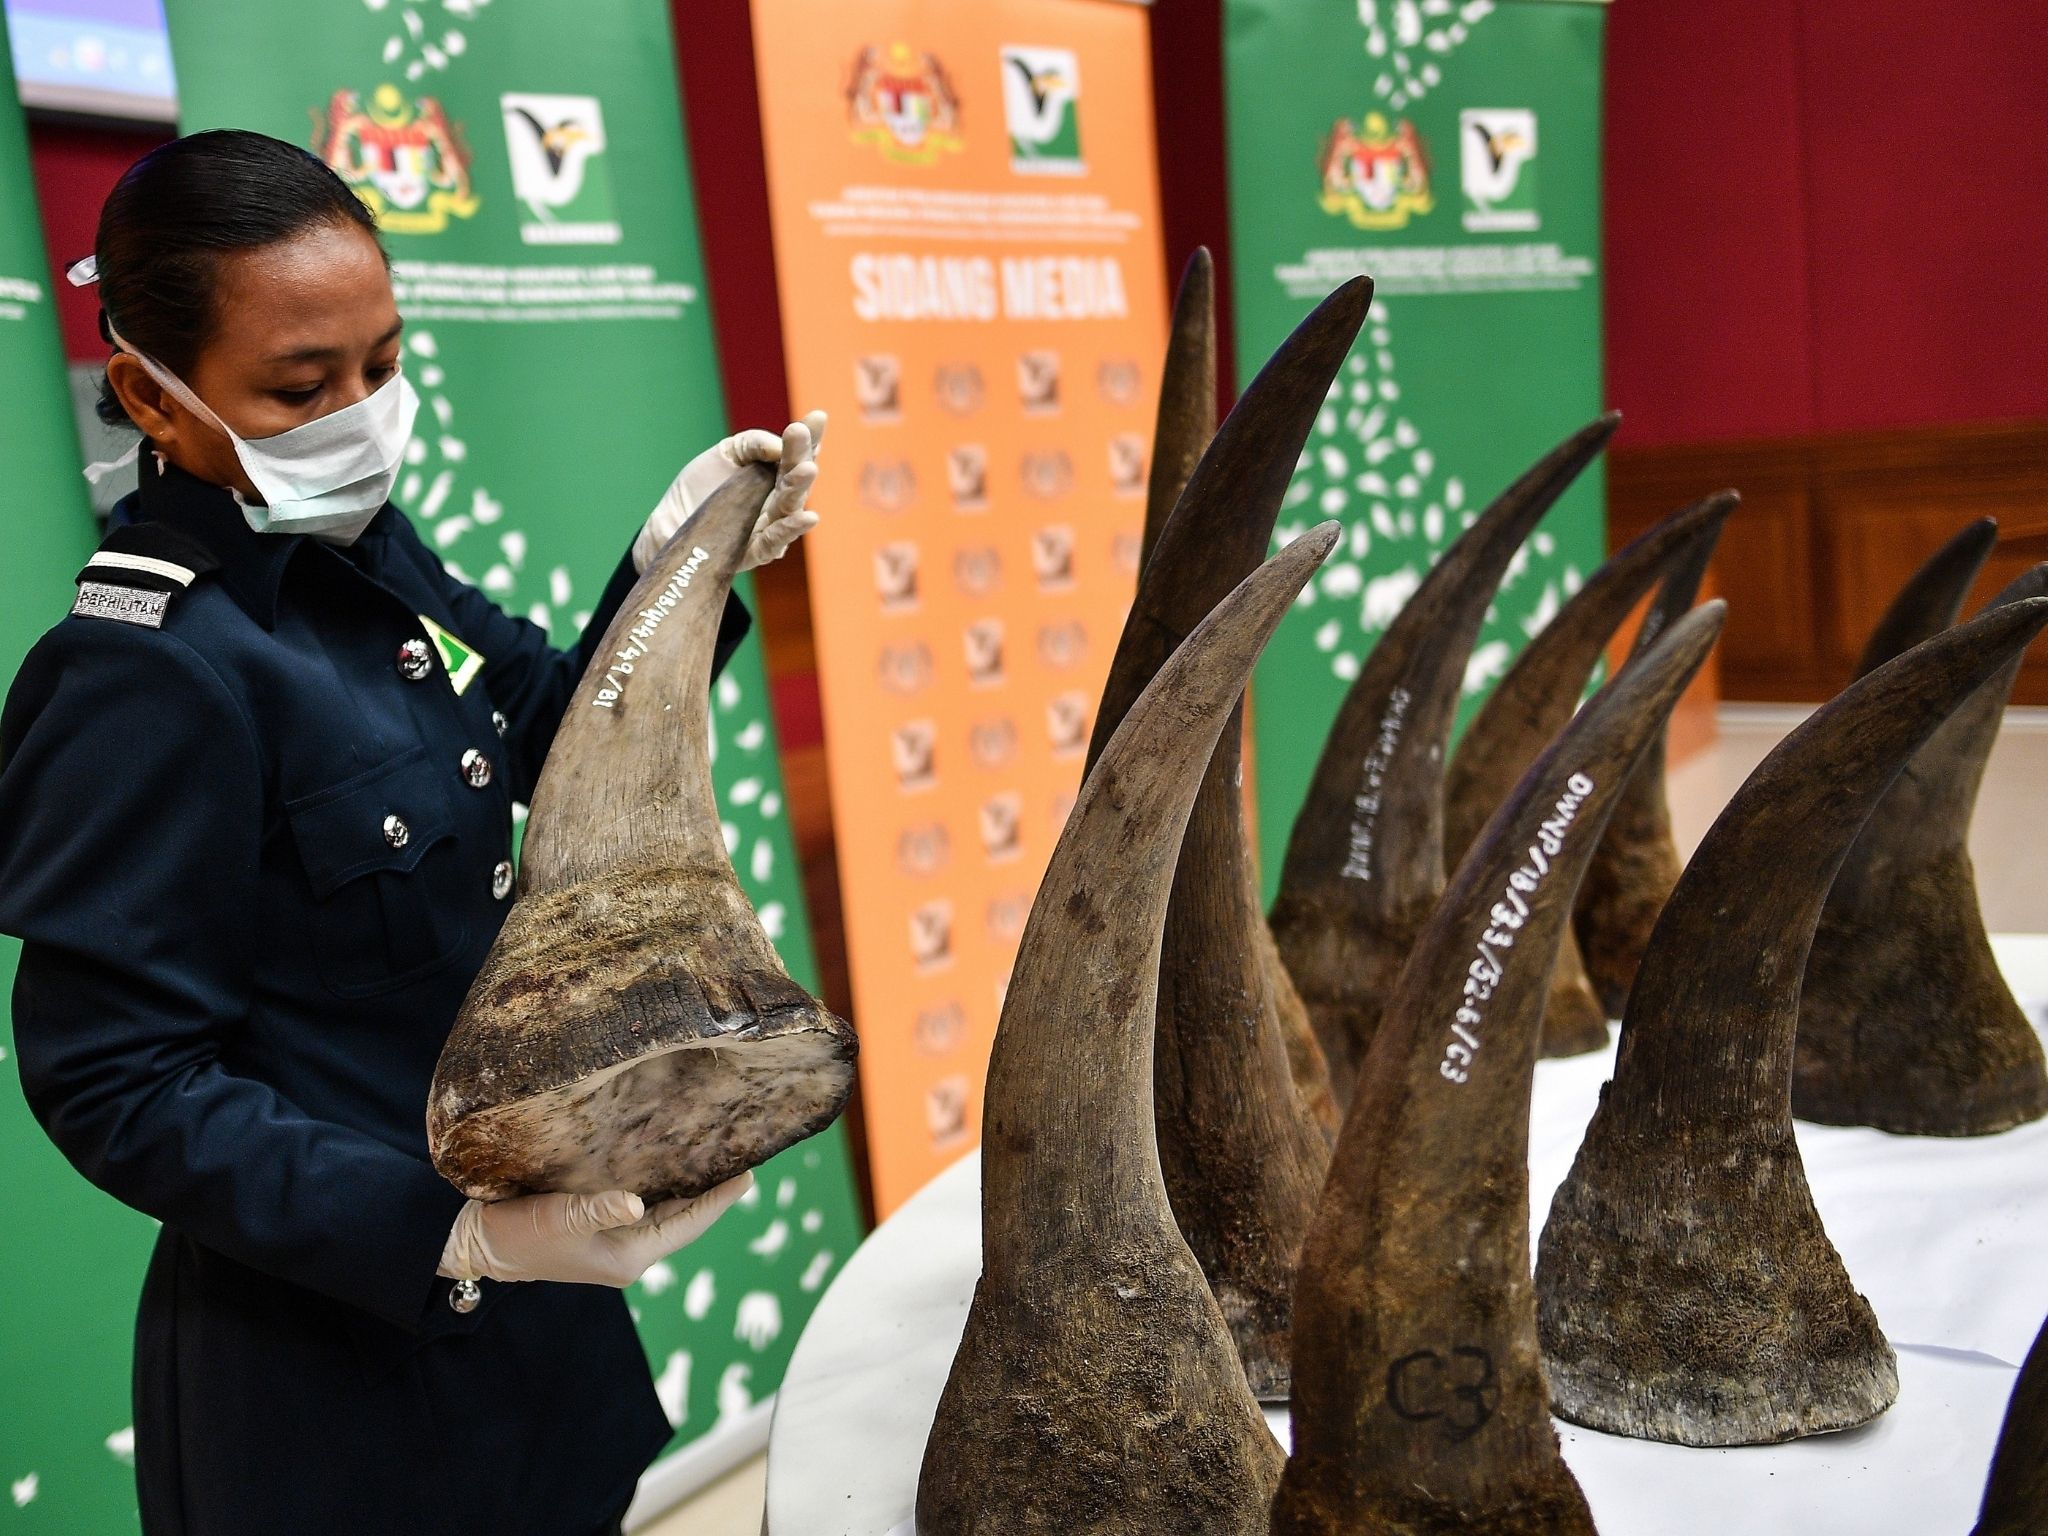 A Malaysian Wildlife official displays seized rhino horns and other animal parts